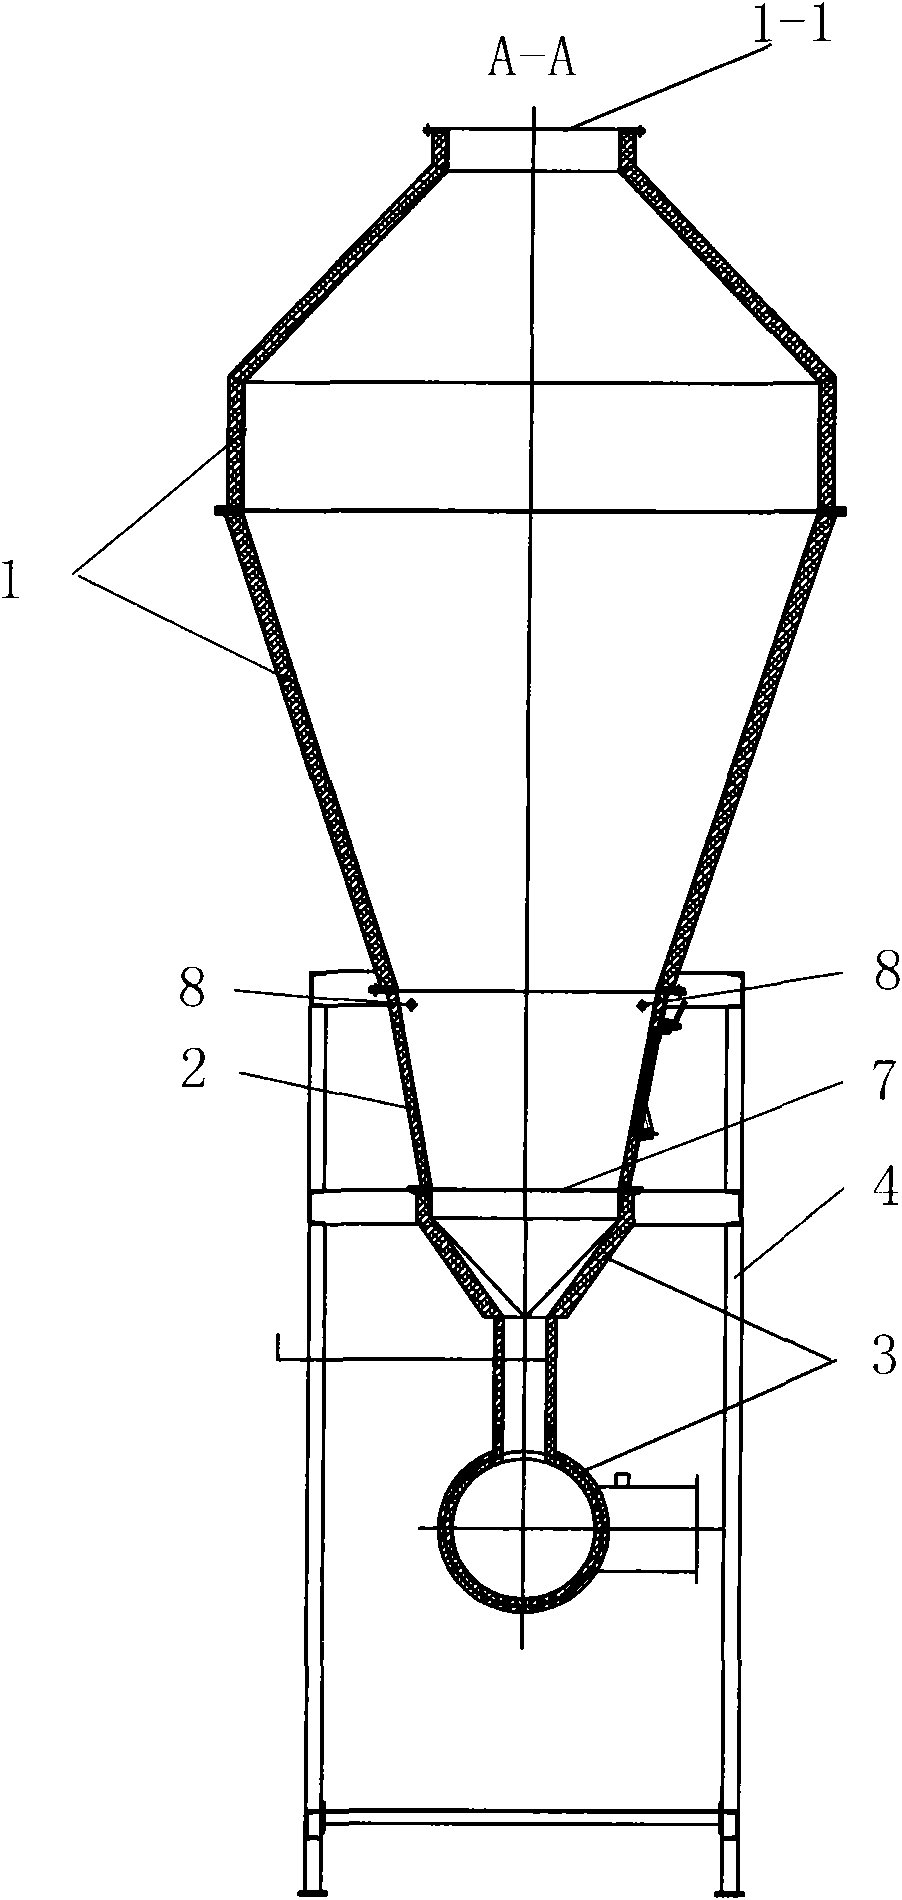 Boiling fluidization drying apparatus